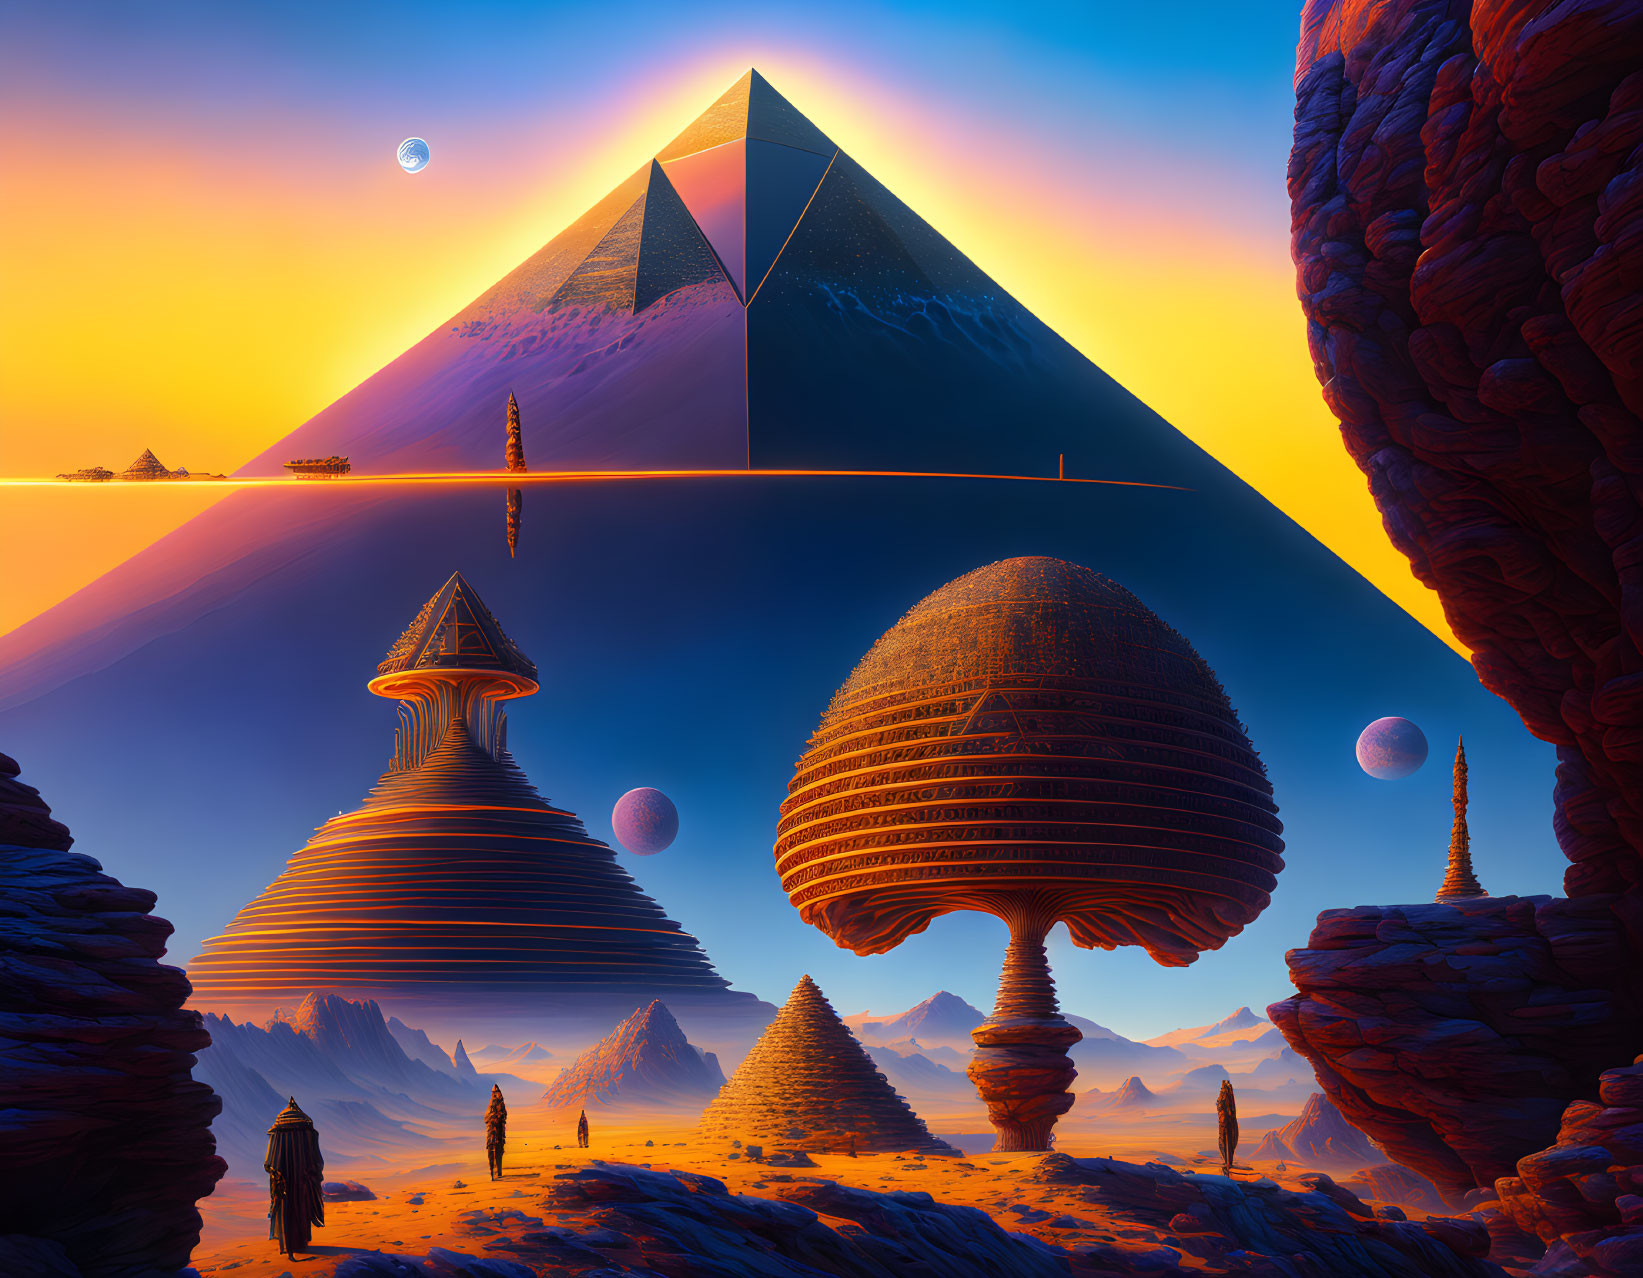 Surreal landscape with pyramid, futuristic structures, and orange sky